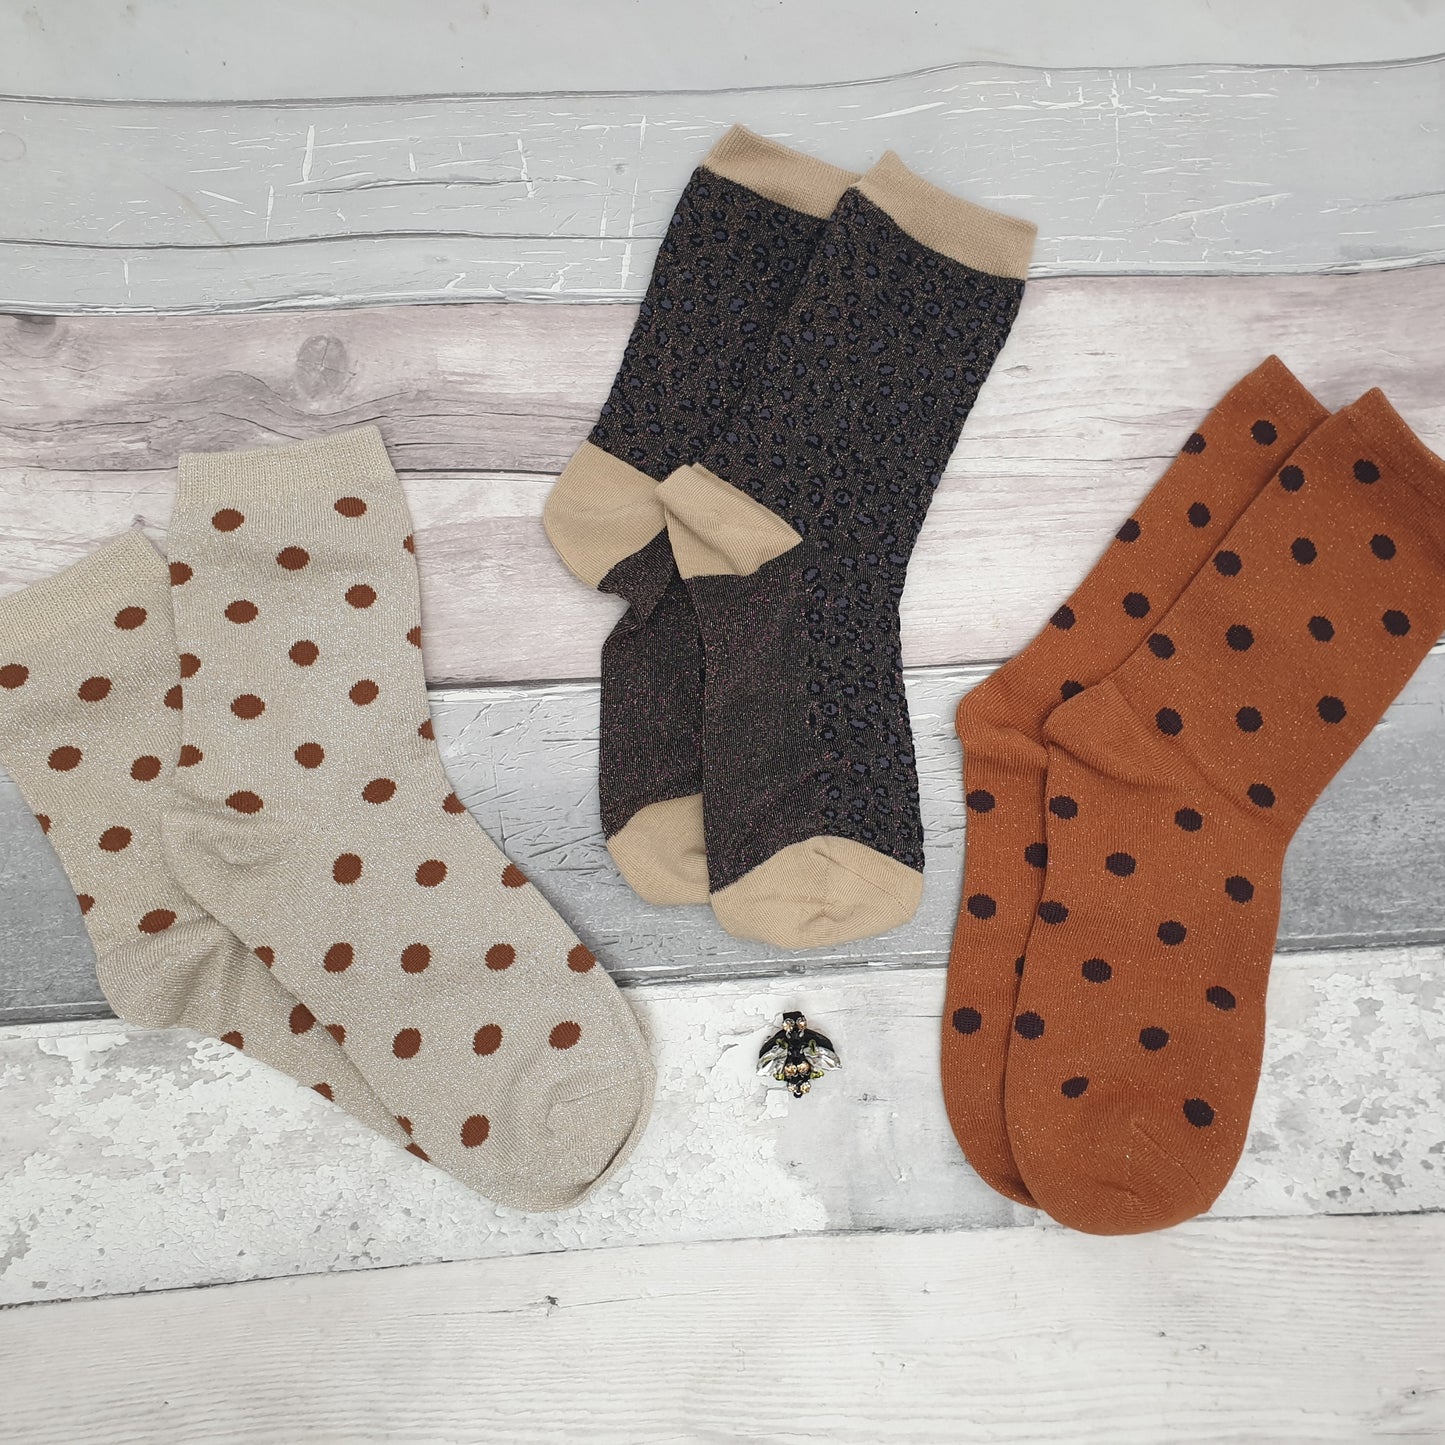 3 Pairs of Socks; cream spotty, copper spotty and silver grey leopard print, all with a sparkly finish. Set is completed with a Bee Brooch.